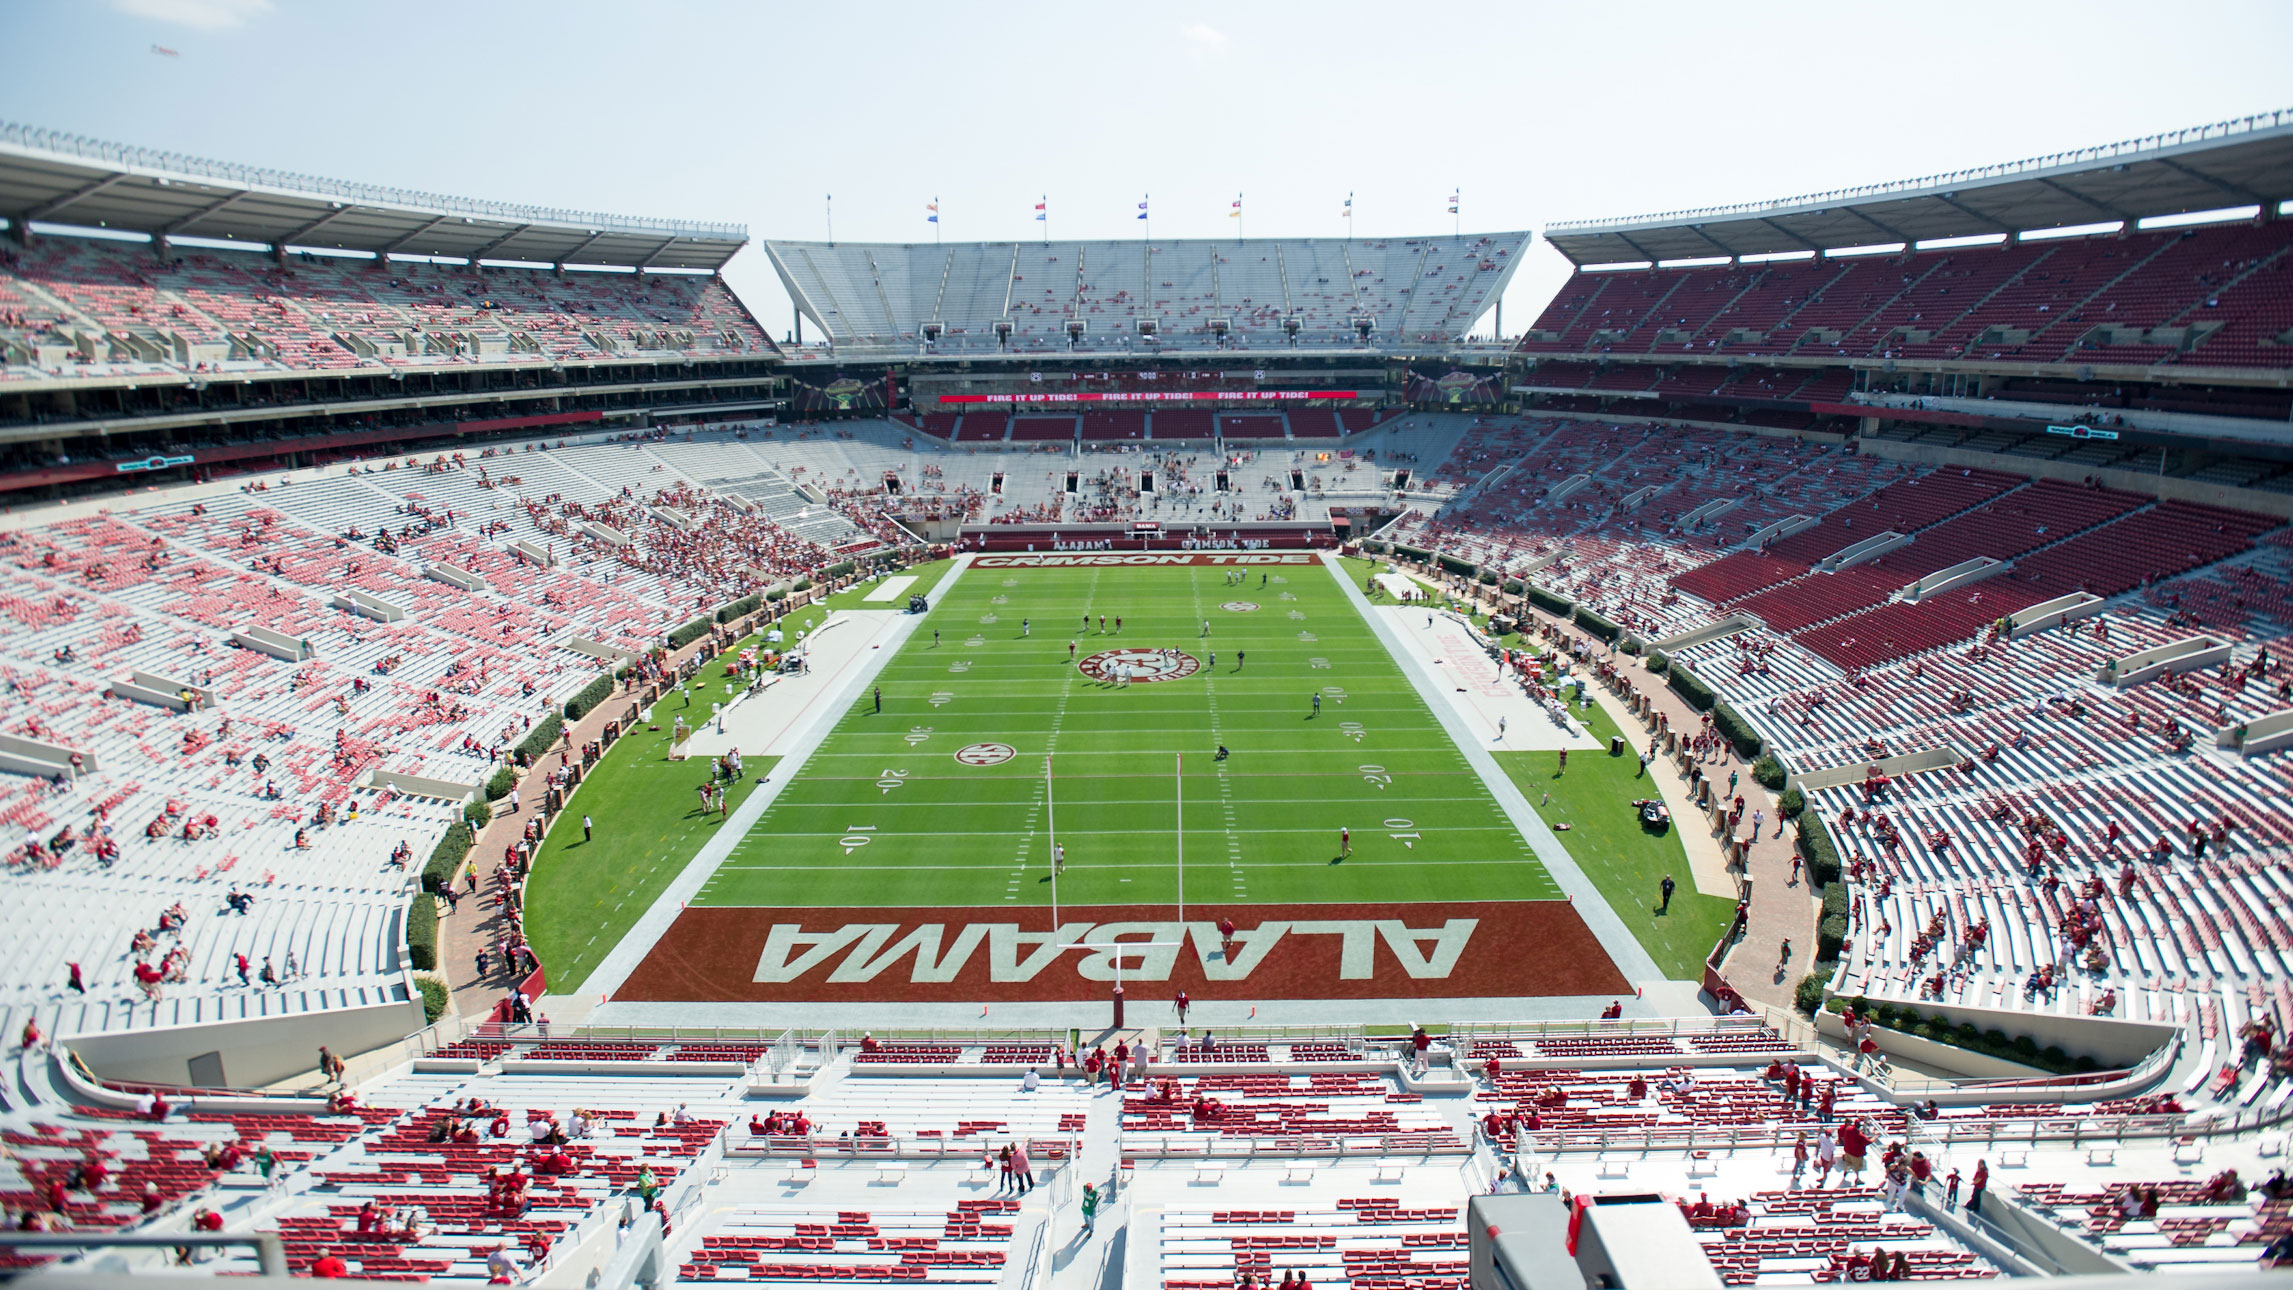 Bryant-Denny Stadium, the home of the Alabama Crimson Tide, can seat more than 101,000 fans for a football game. This season, it will hold about a fifth of that.